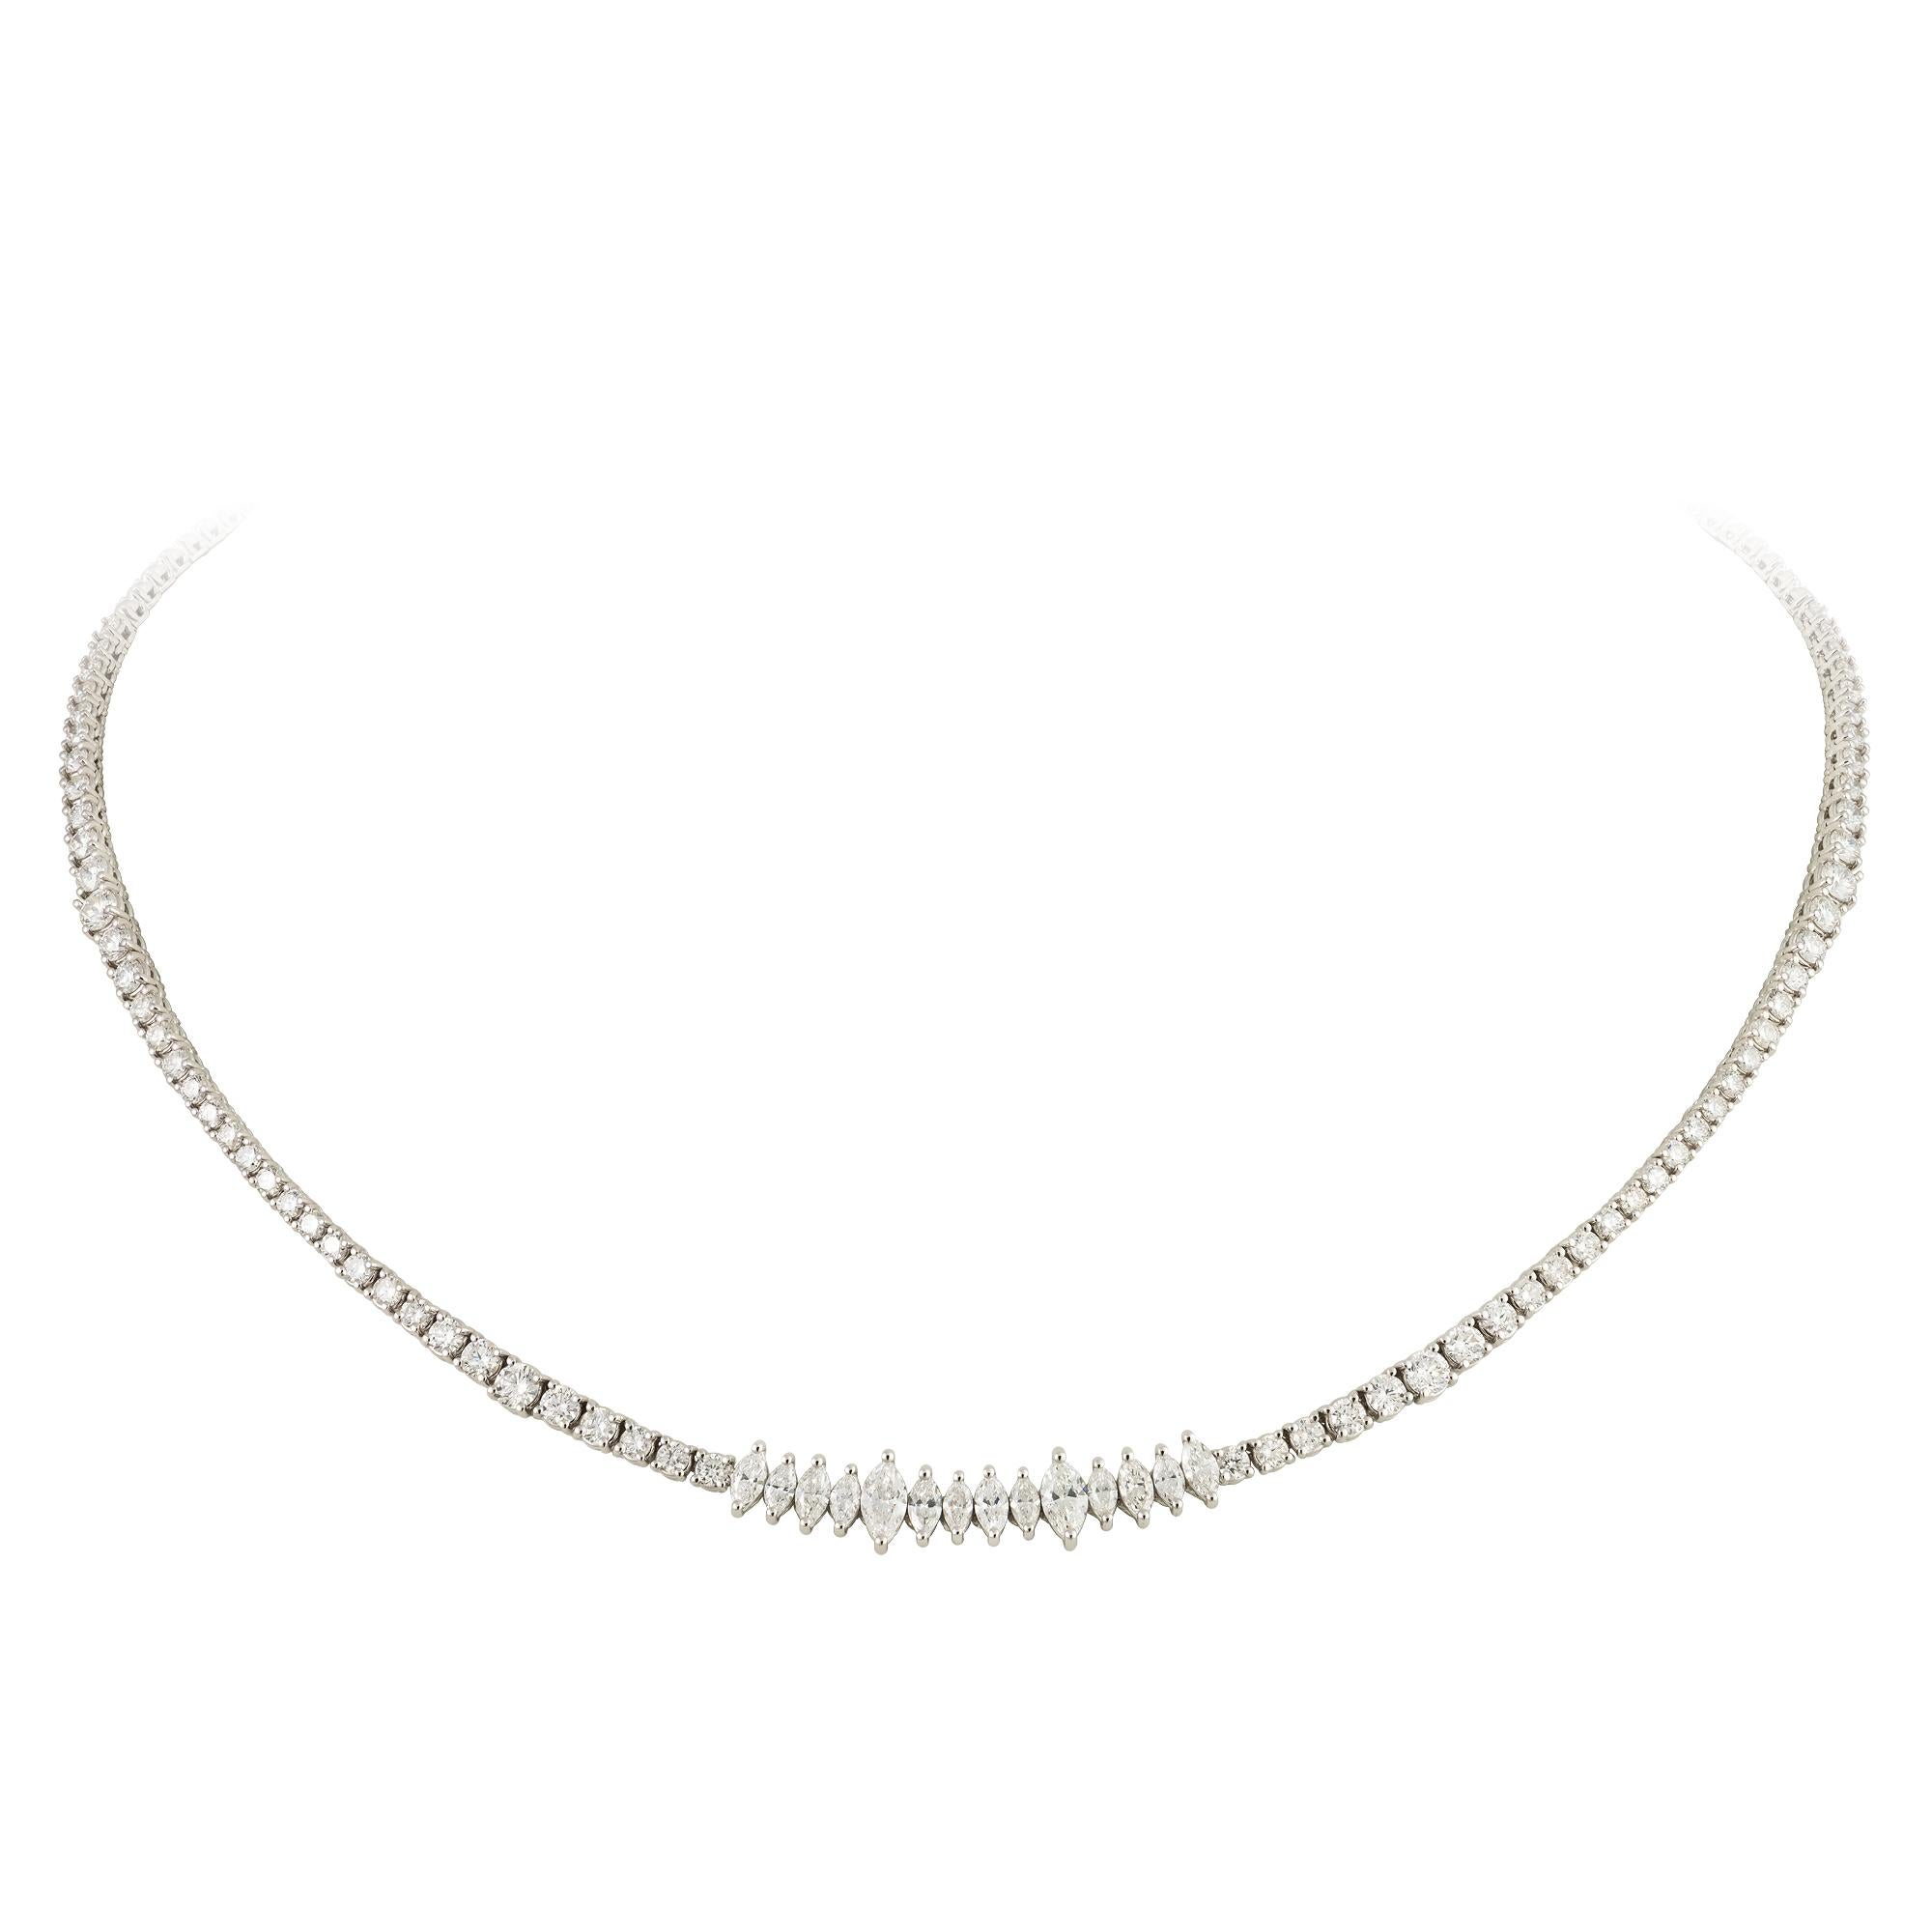 Women's Fashion White Gold 18K Necklace Diamond For Her For Sale